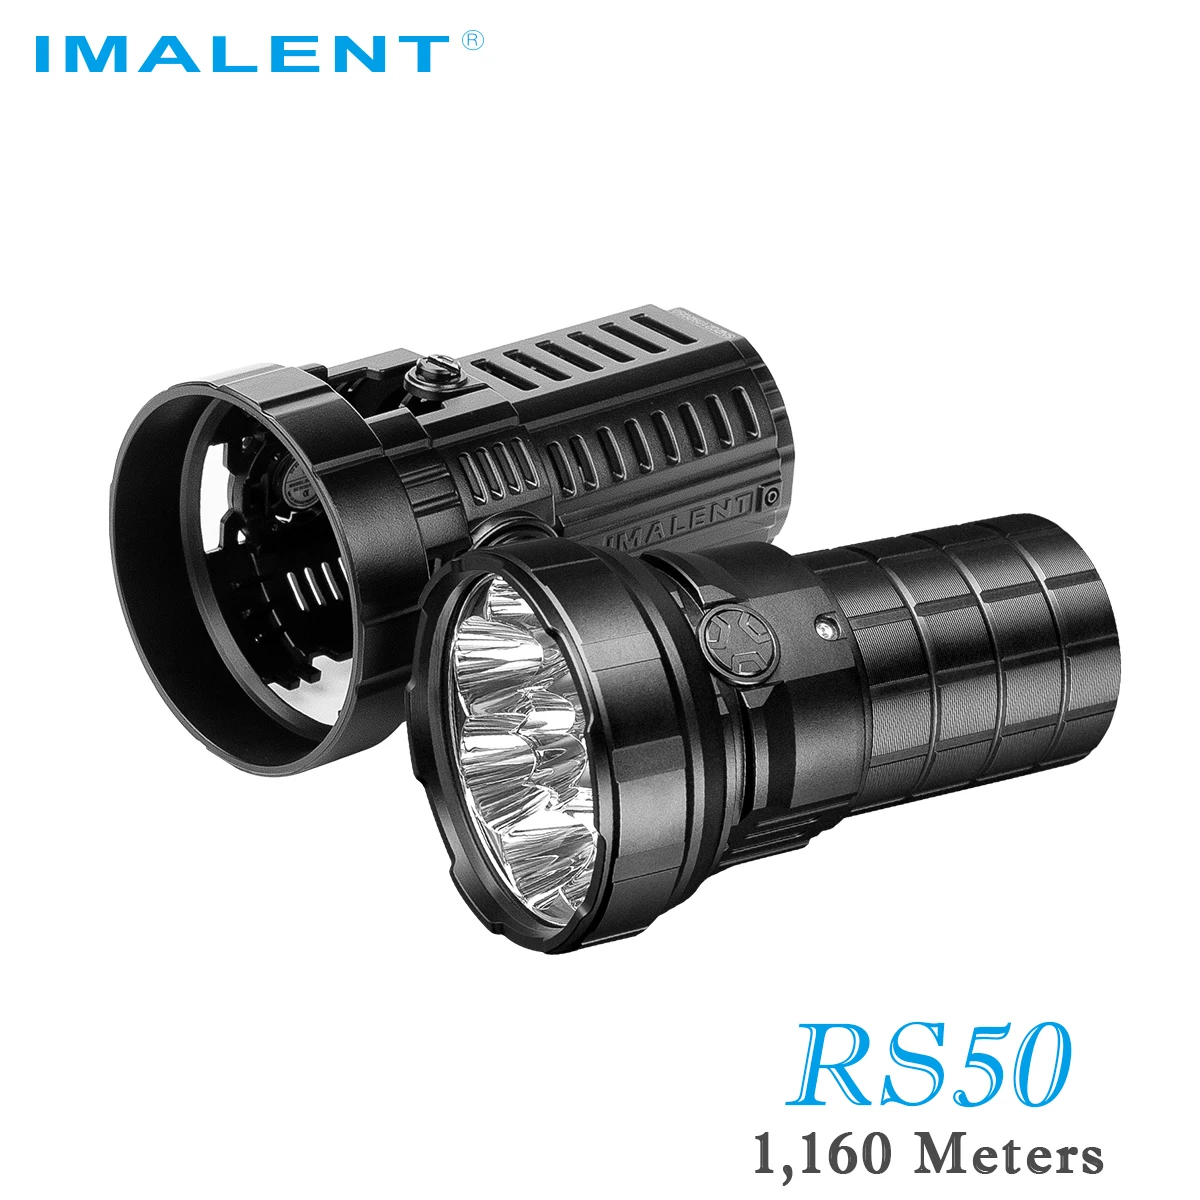 IMALENT RS50 High Bright Powerful Flashlight 20000 Lumens CREE XHP50.3 HI LED 1160 Meters Outdoor Searching Powerful Lantern